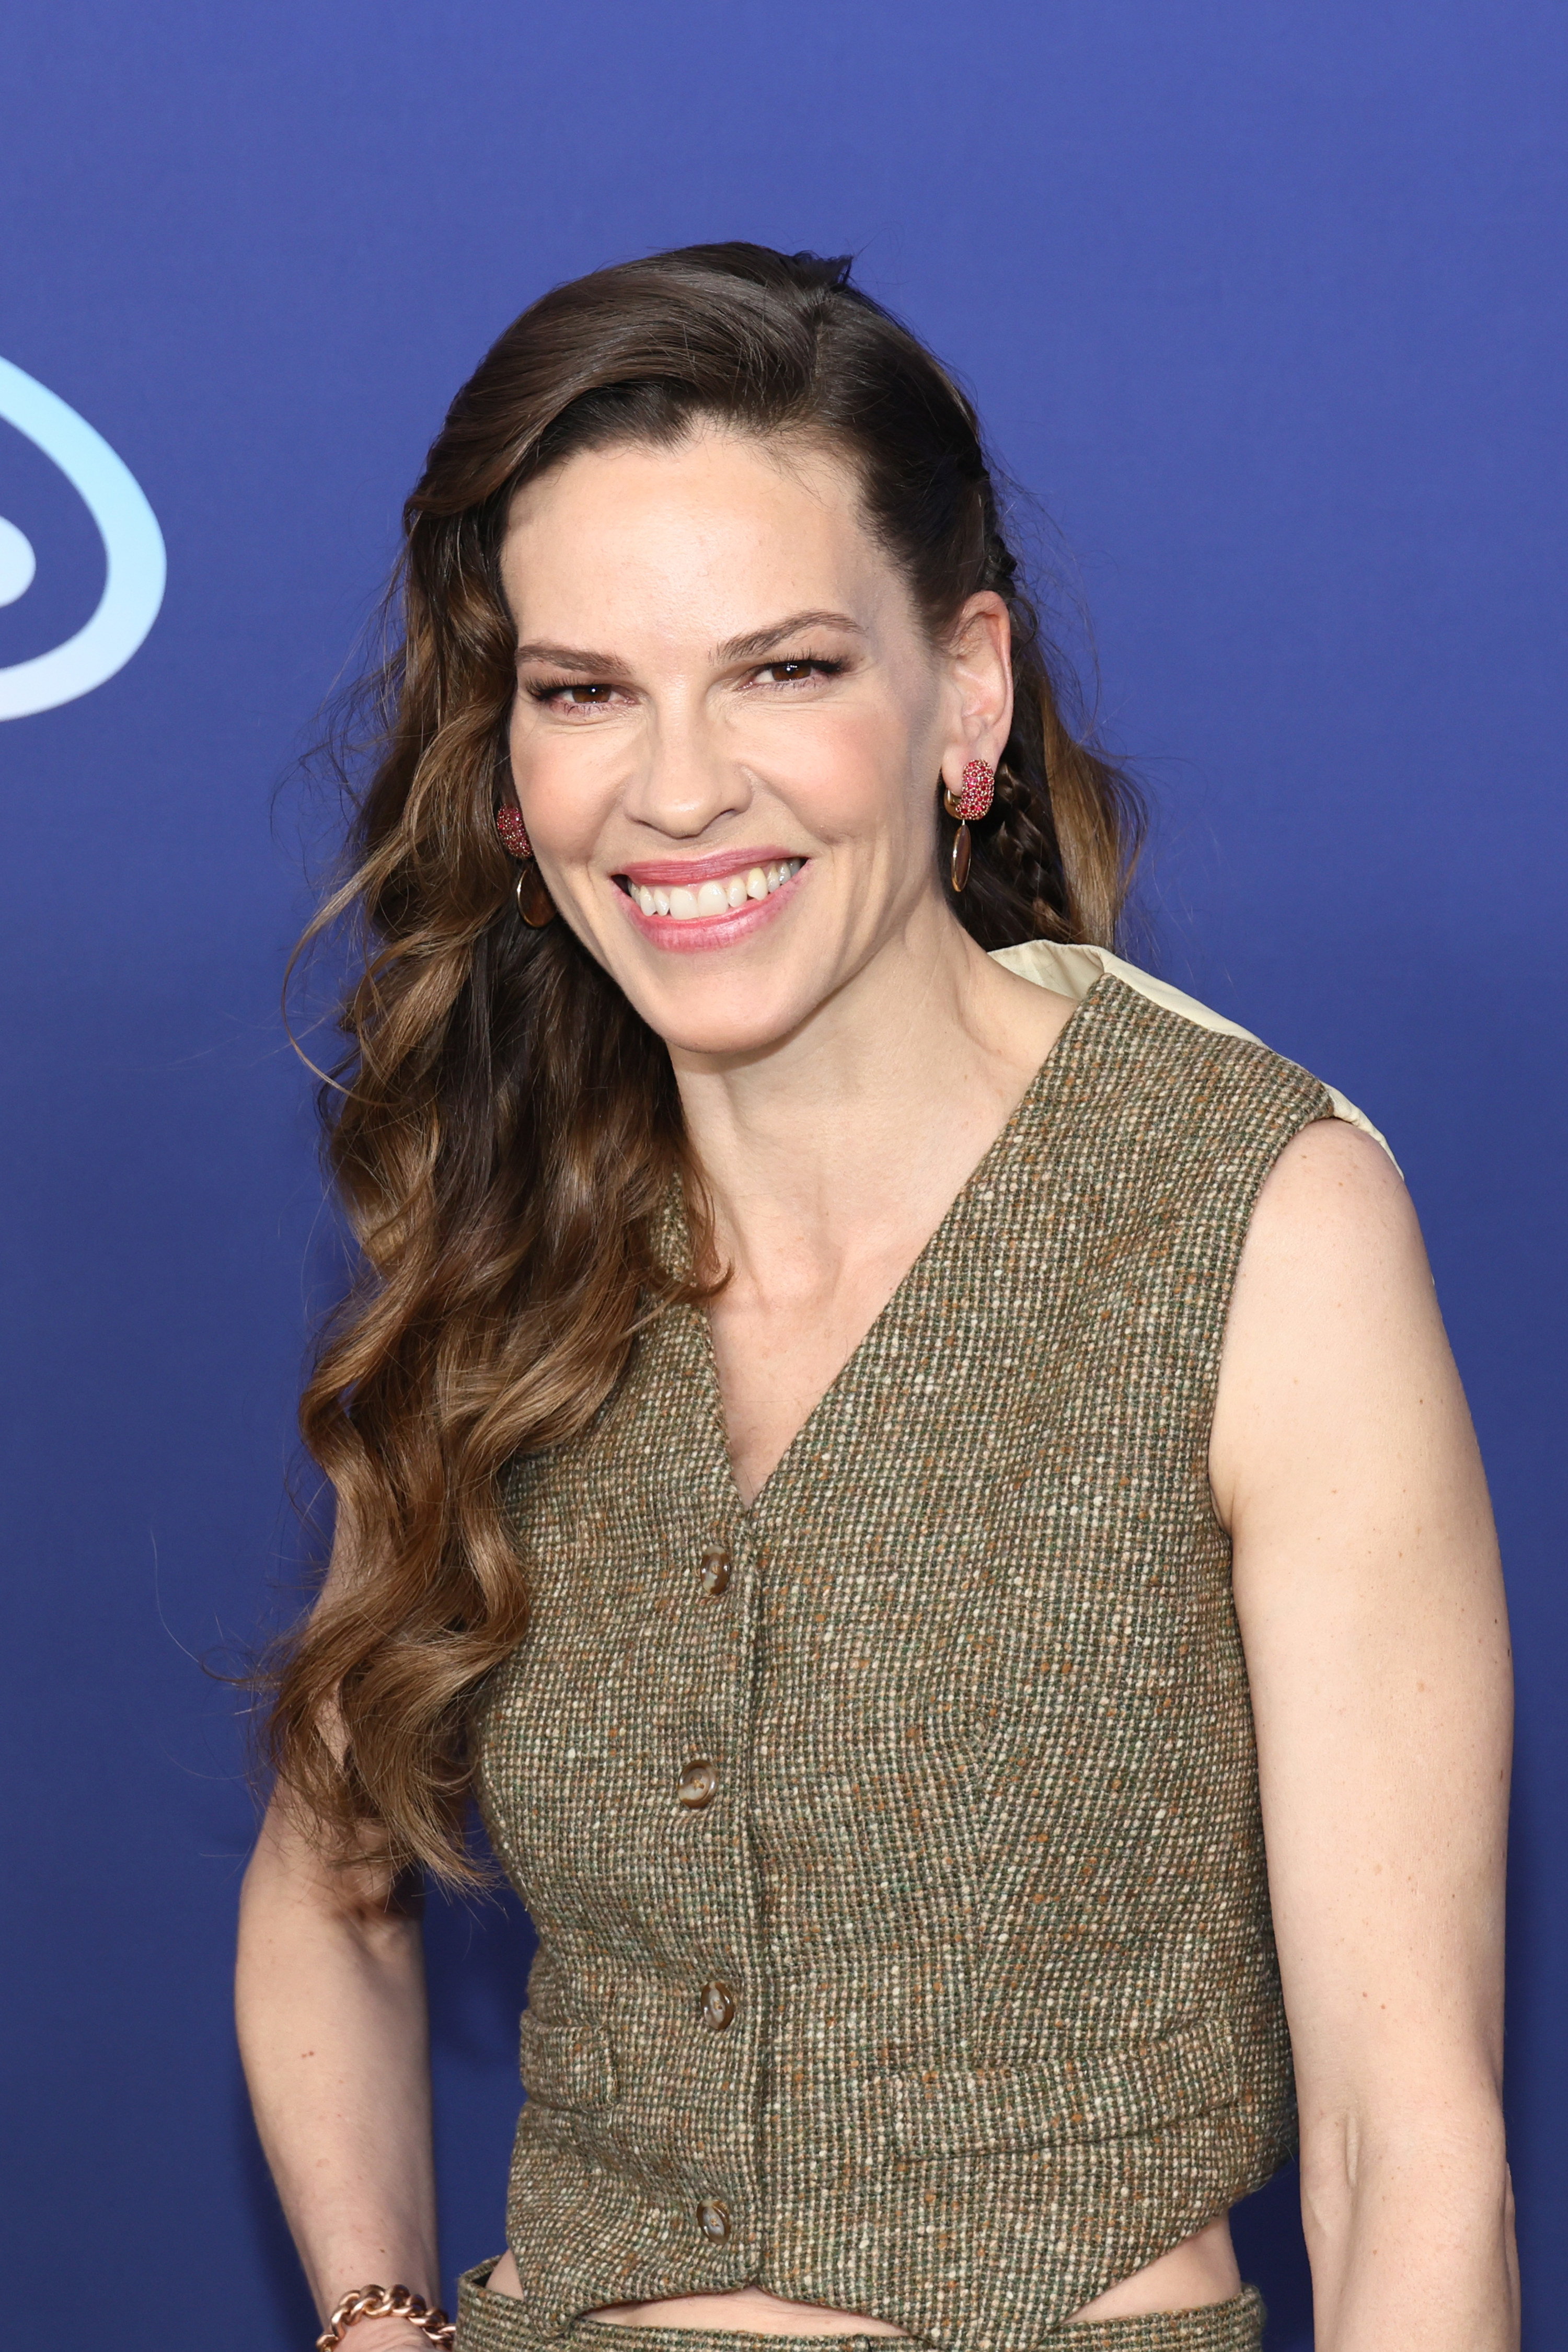 Hilary Swank smiles at the ABC Disney Upfront event on May 17, 2022